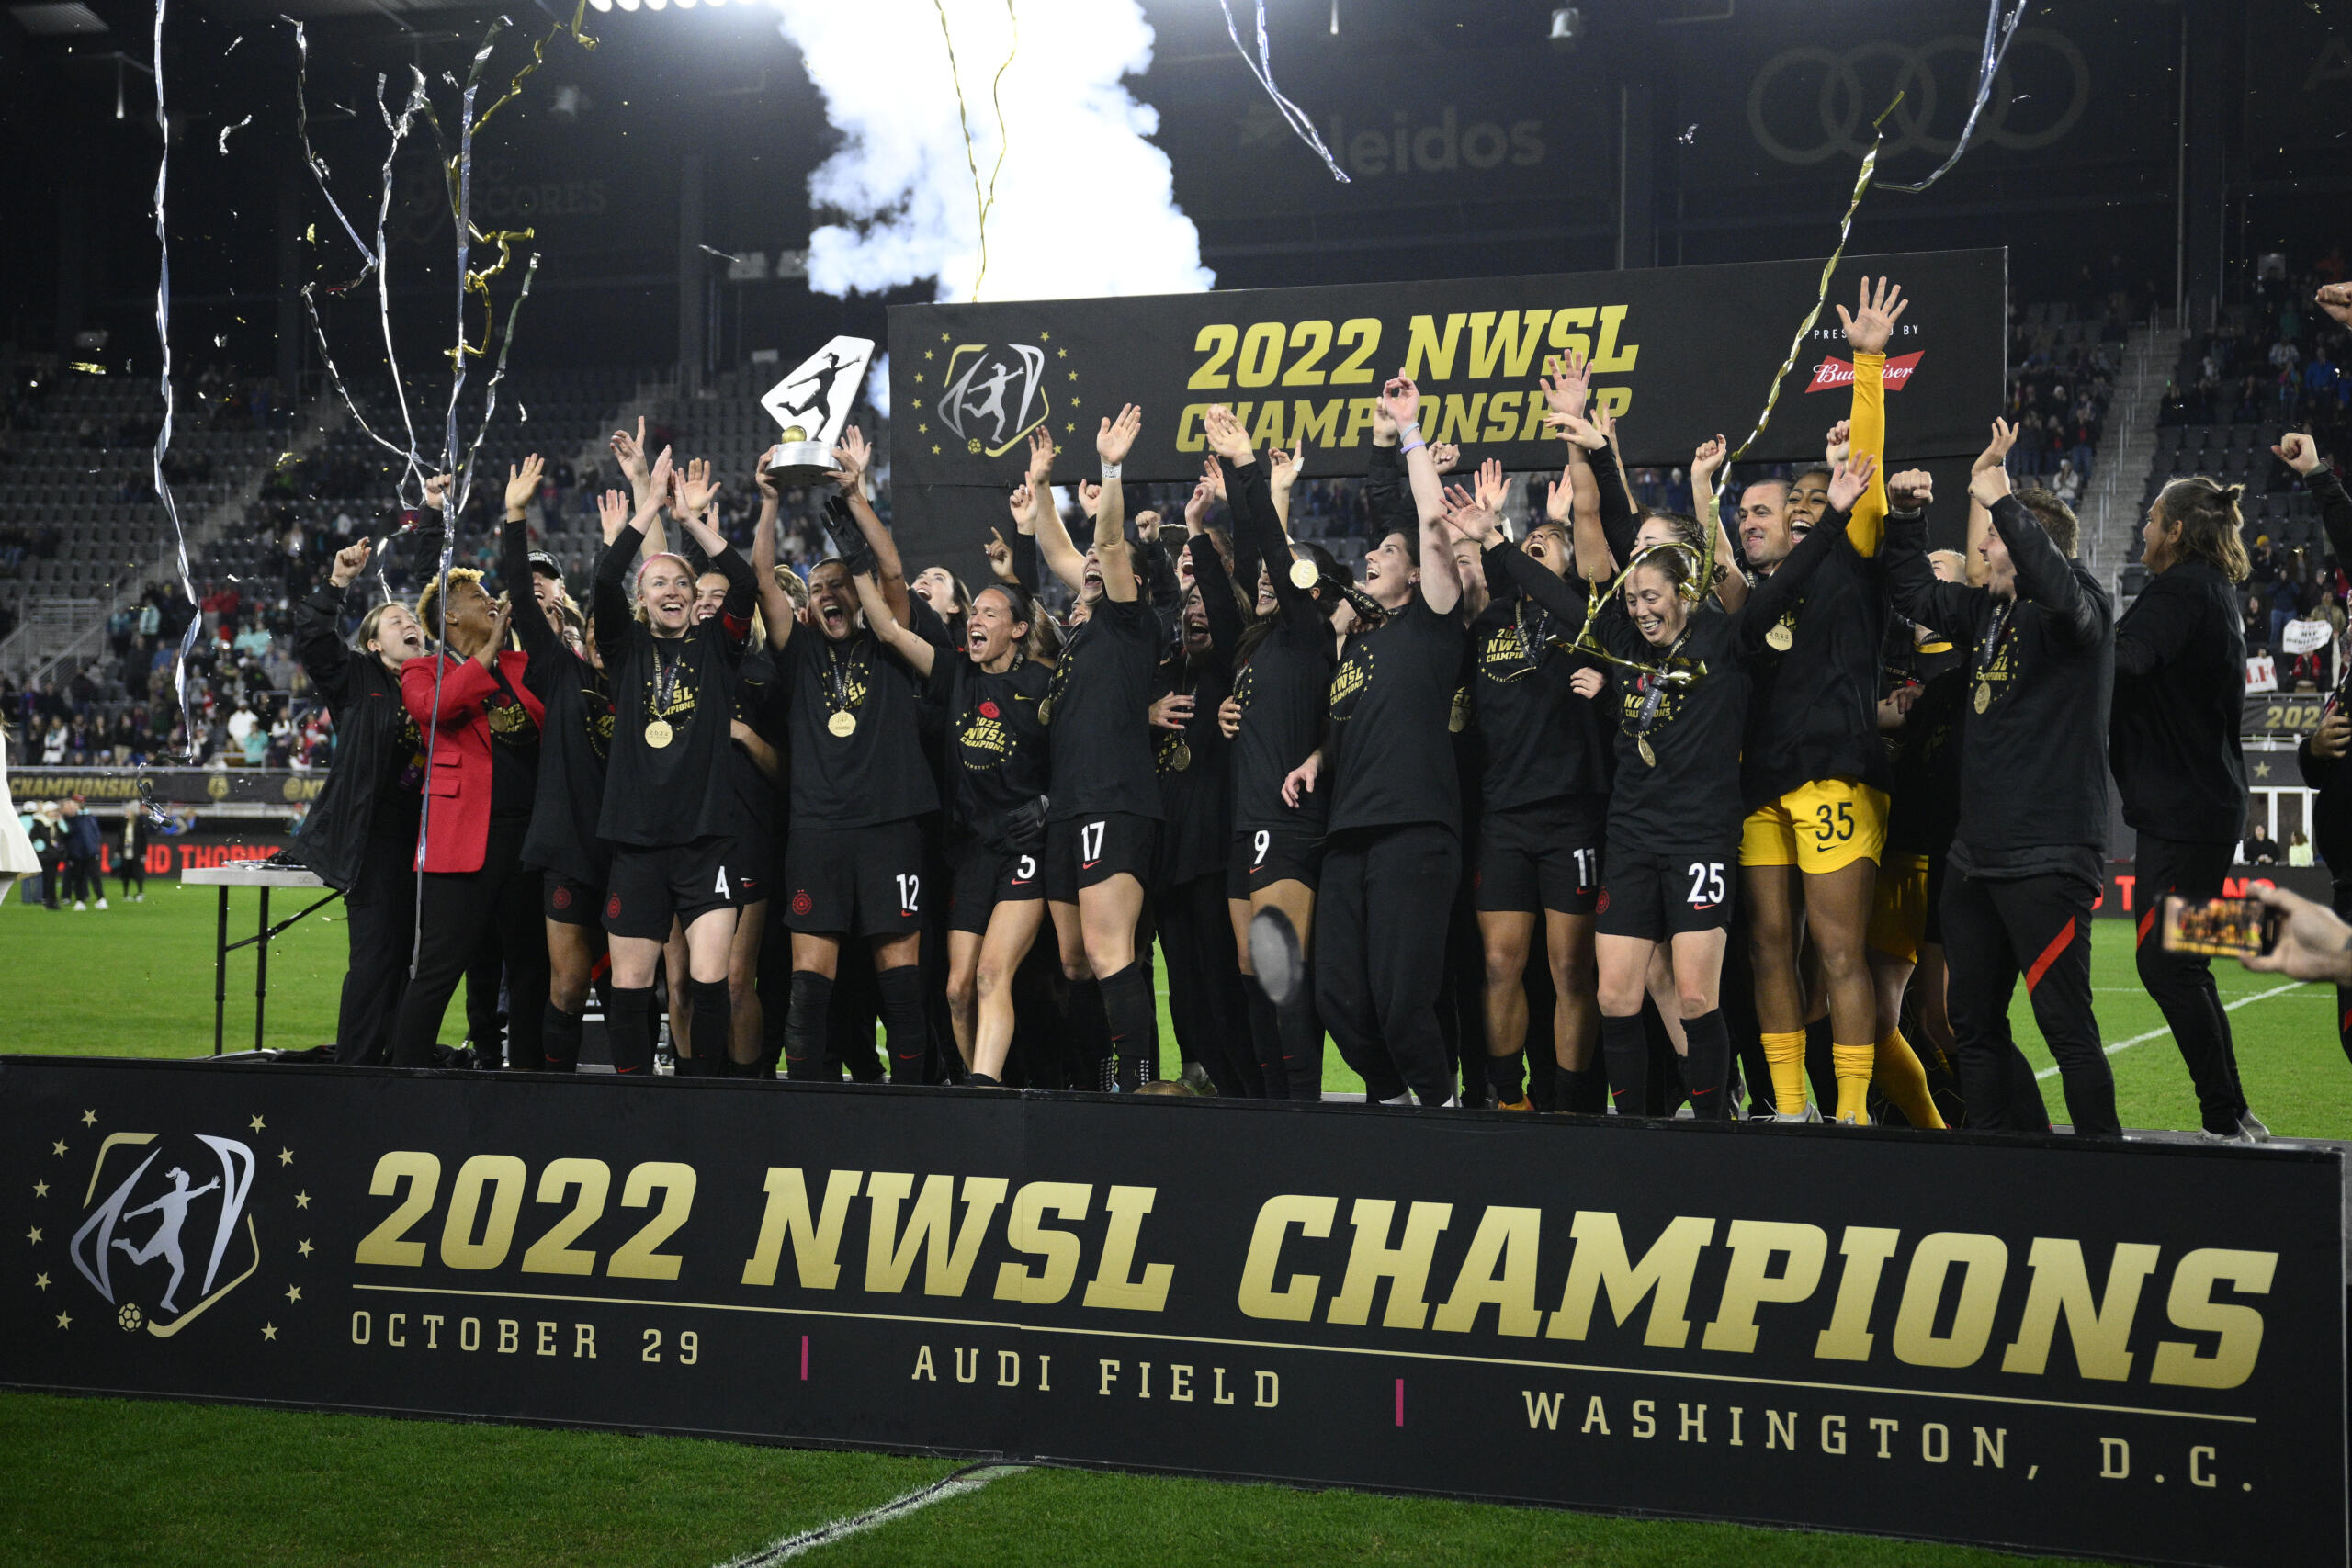 Portland Thorns celebrate with the trophy after winning the NWSL championship against the Kansas City Current on Oct. 29, 2022, in Washington. The owner of the Portland Thorns announced Thursday, Dec. 1, he is putting the club up for sale.